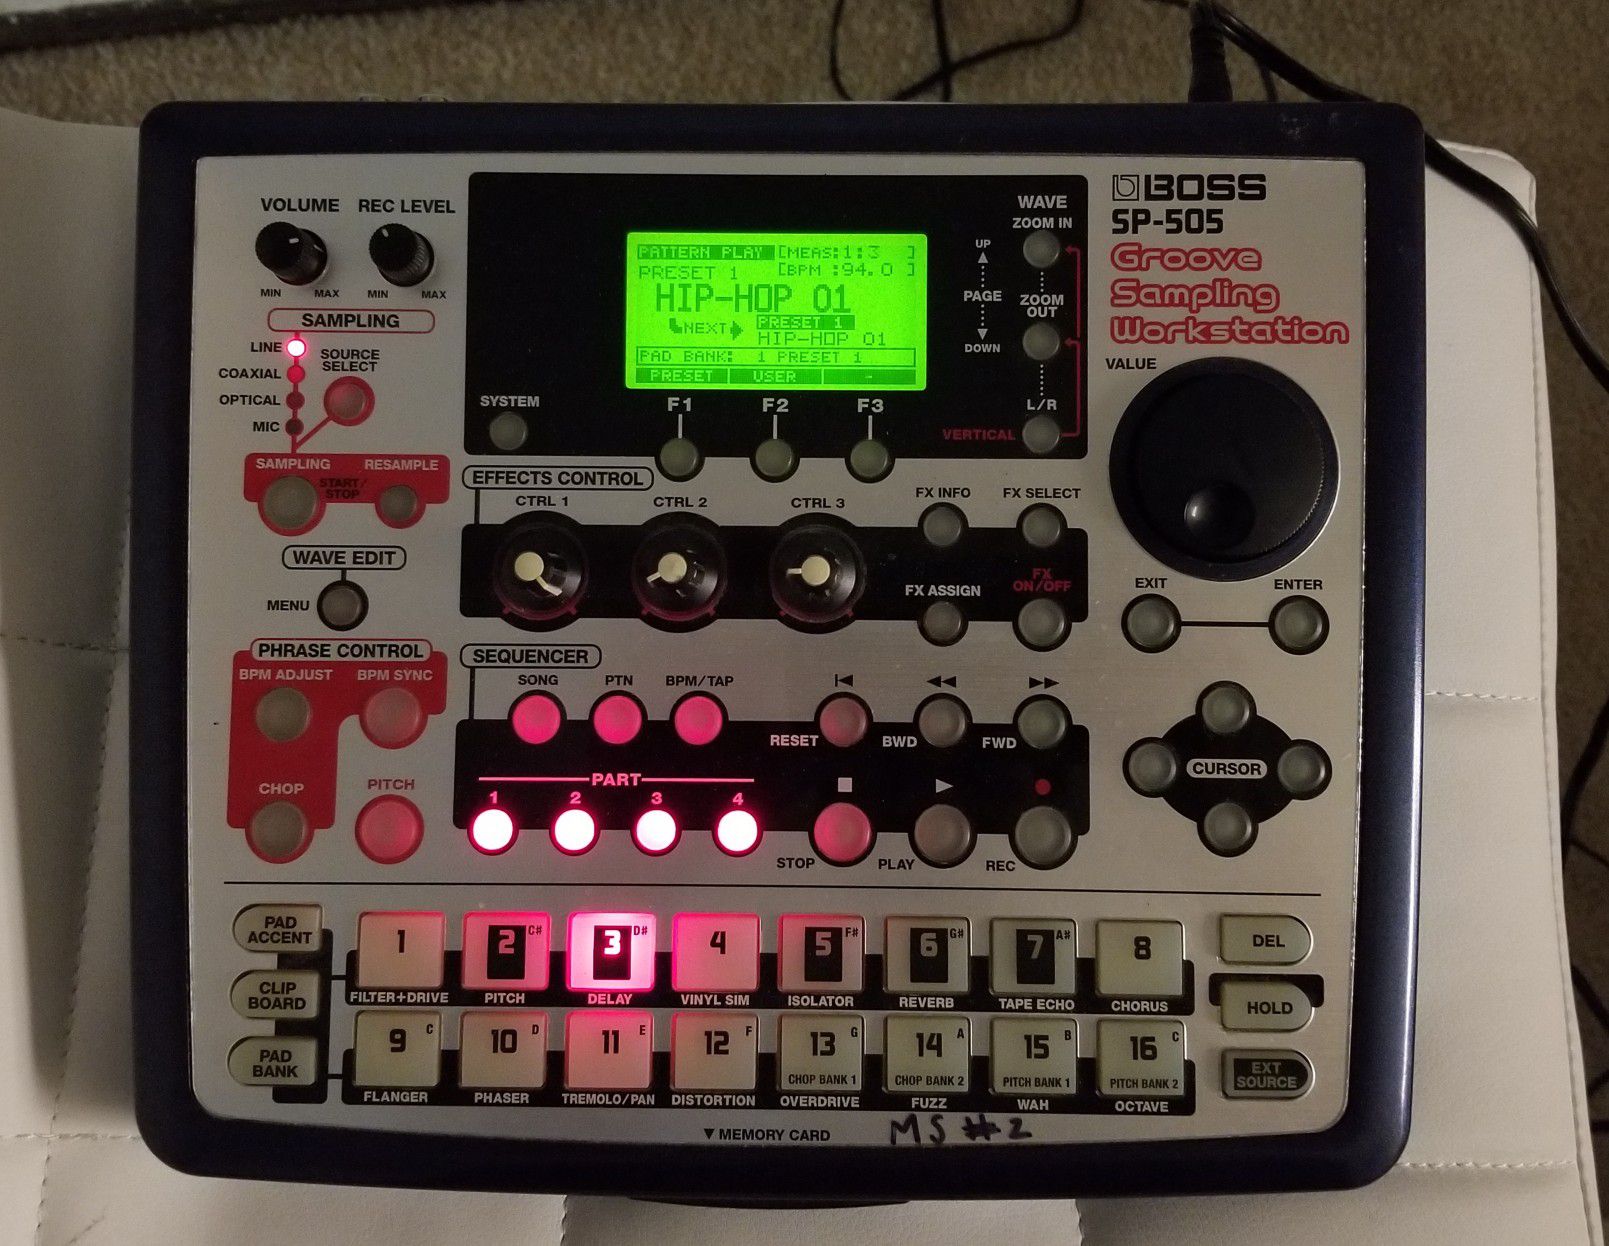 BOSS SP-505 sampler with afghani/hindi samples for Sale in